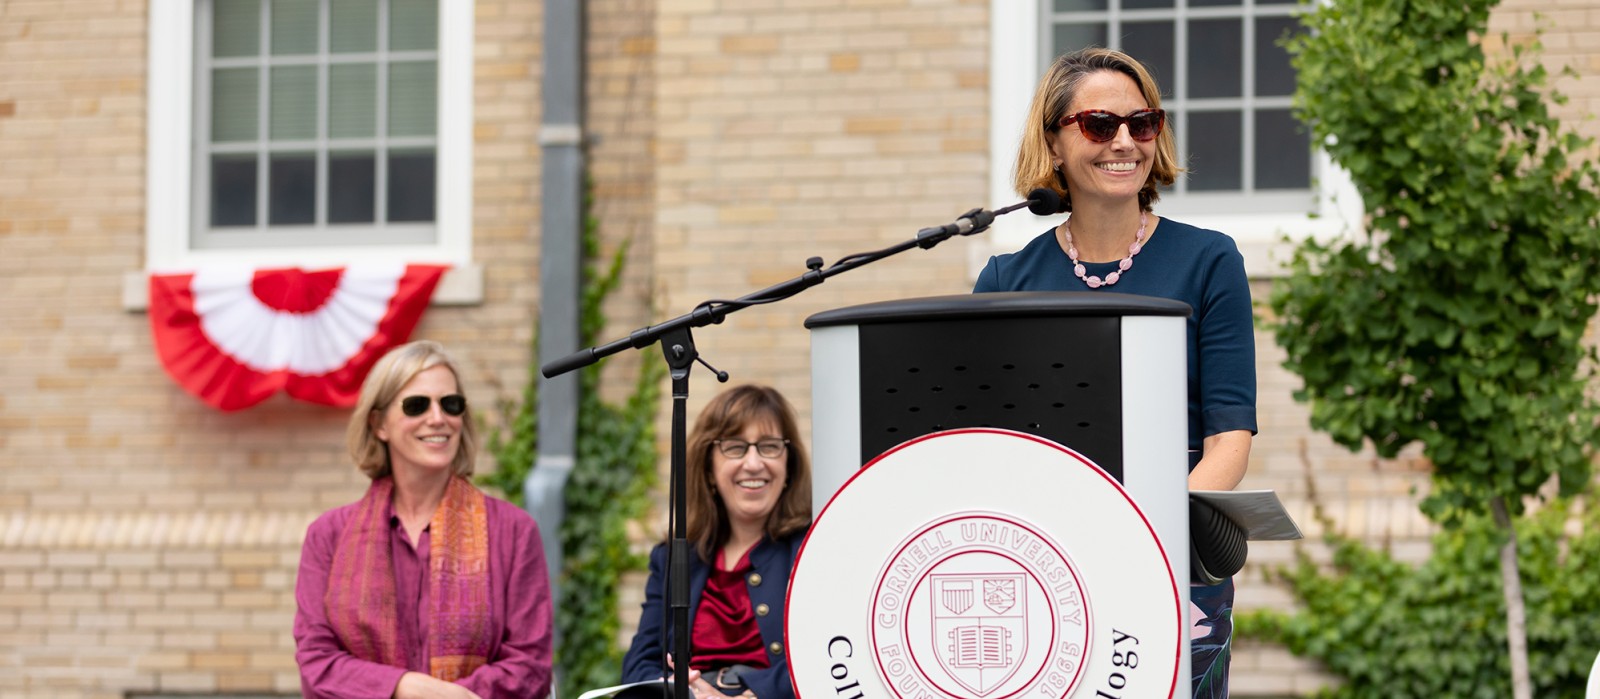 woman speaking at a lectern with Cornell University seal